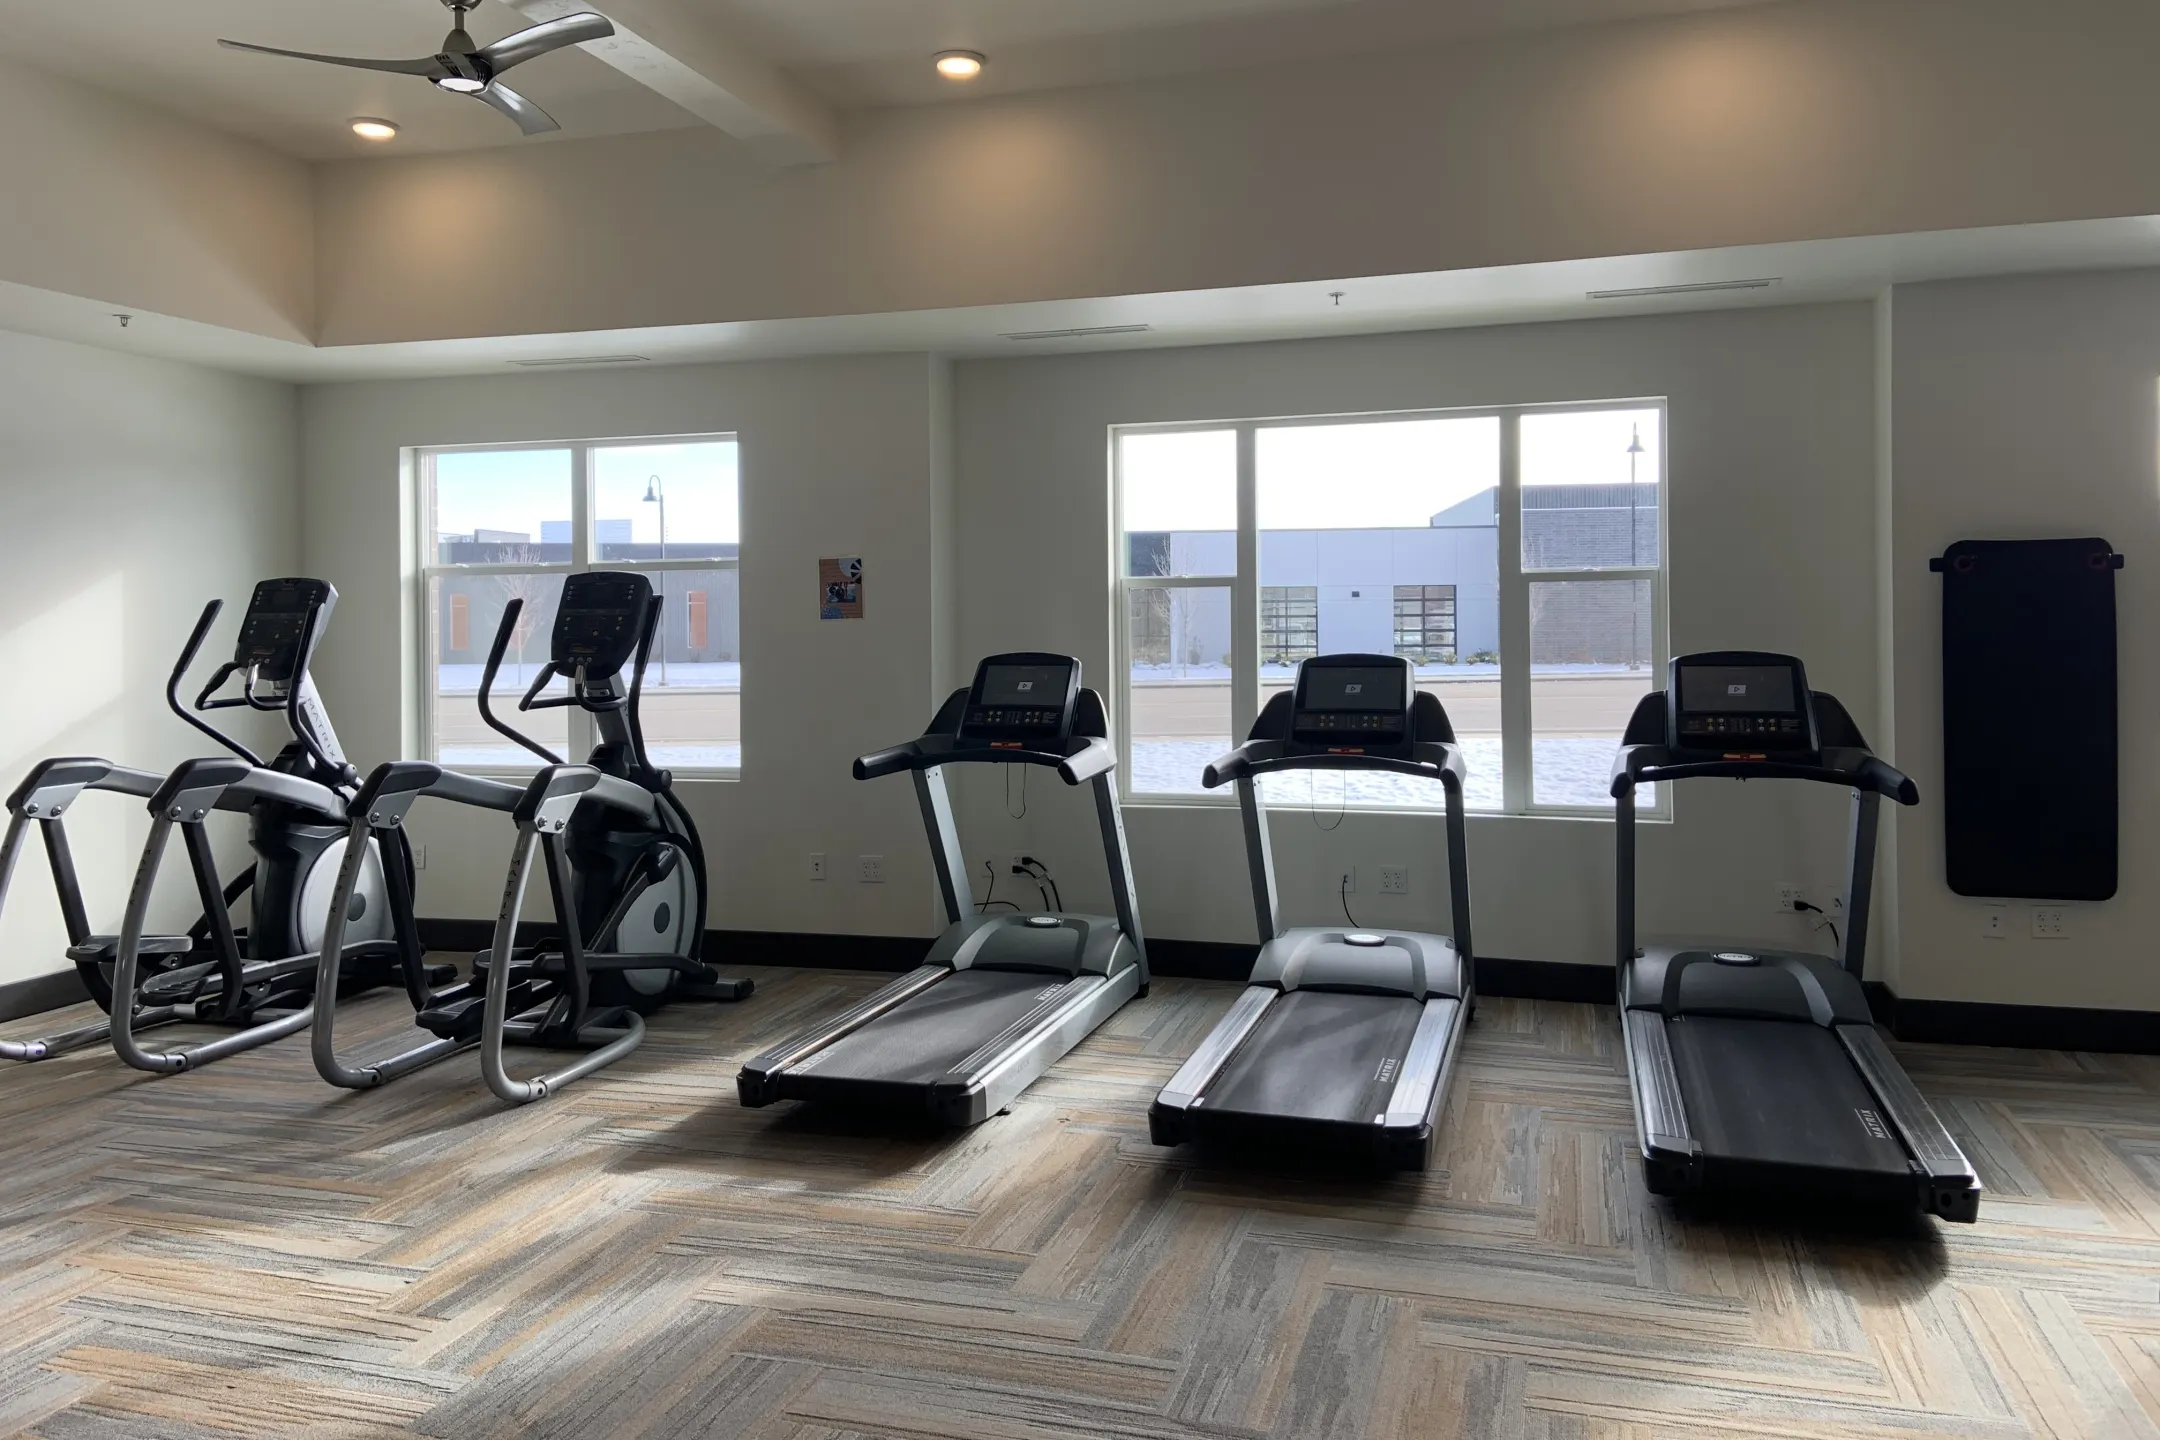 Fitness Weight Room - Arboretum At Barber Station - Boise, ID